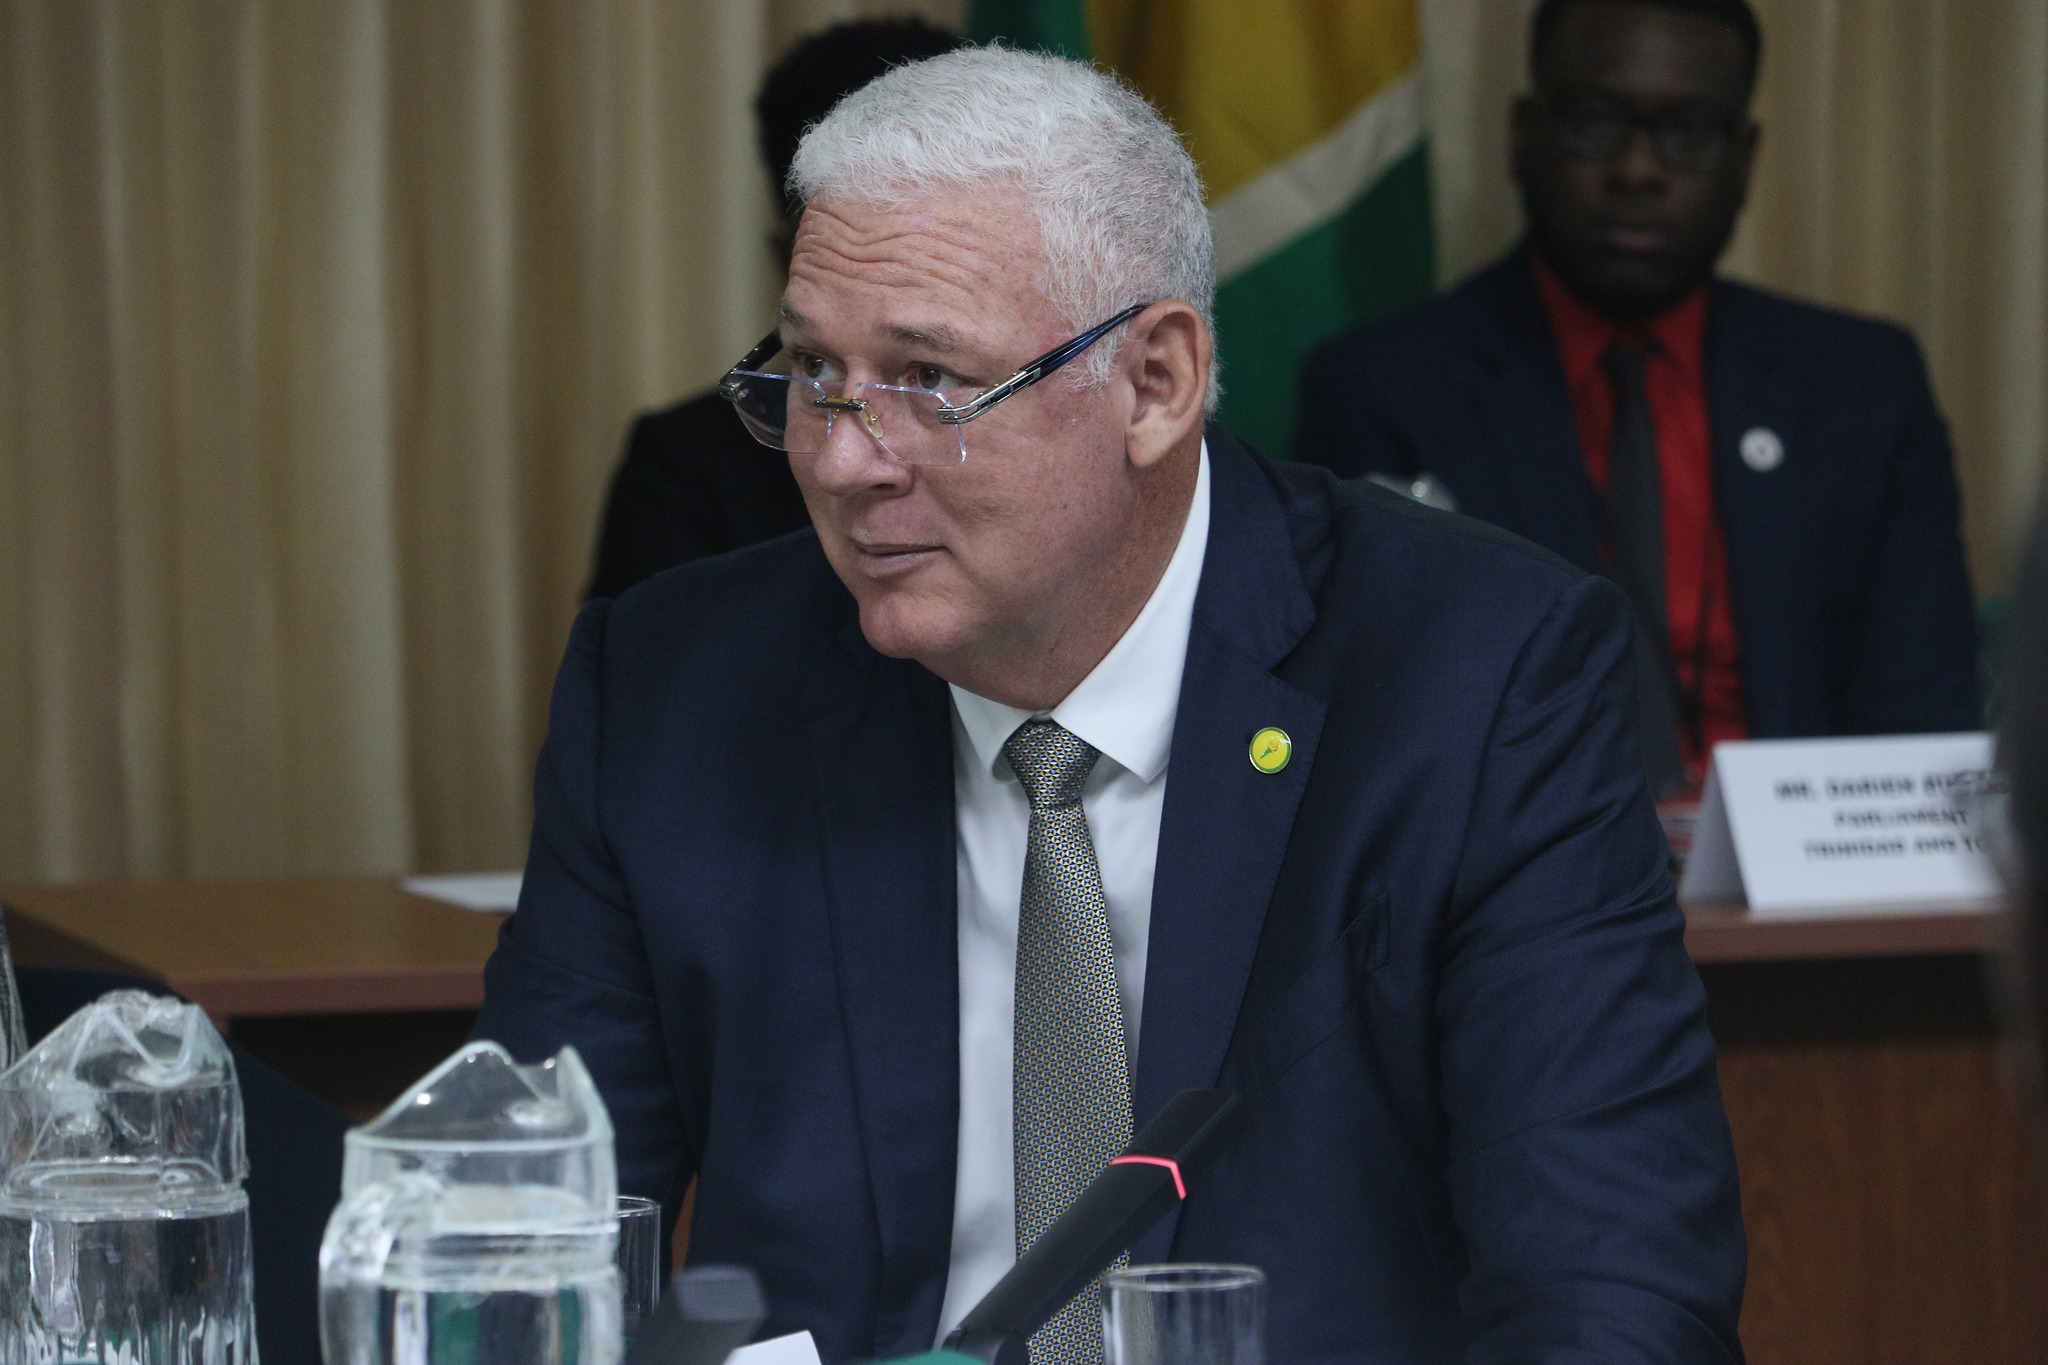 Griffith: Rowley’s attack on St. Lucian Opposition Leader demonstrates lack of diplomacy and foresight